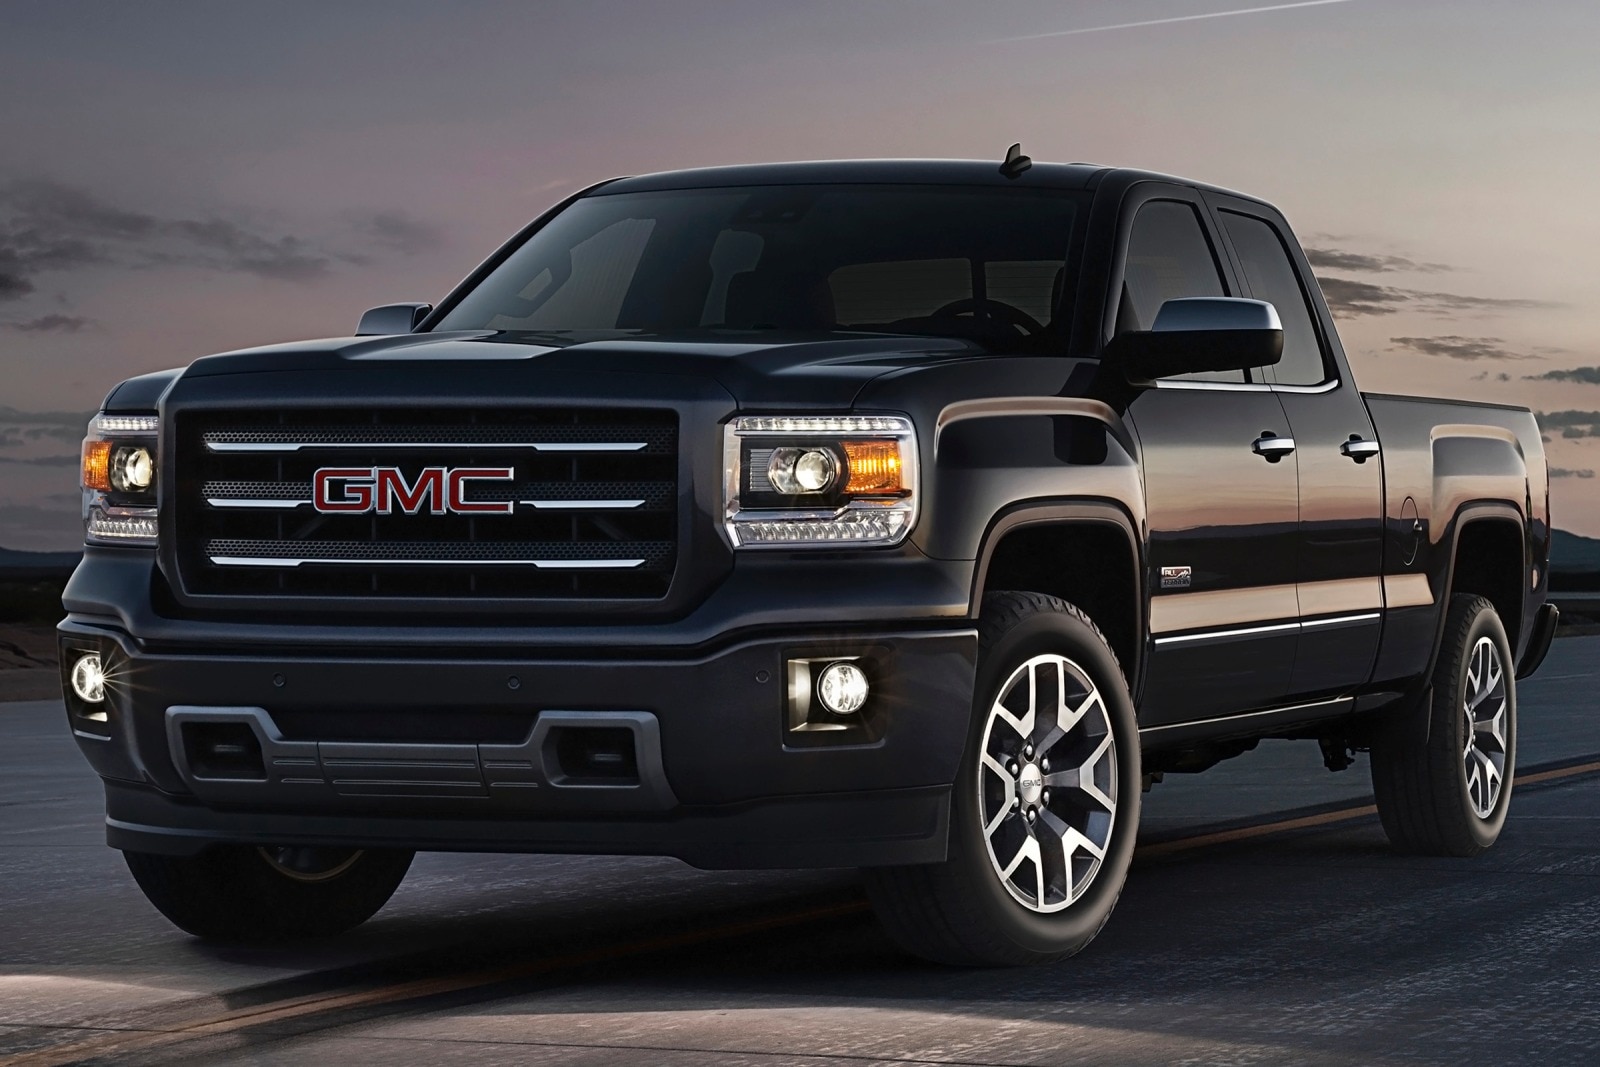 Used 2014 GMC Sierra 1500 Double Cab Review | Edmunds